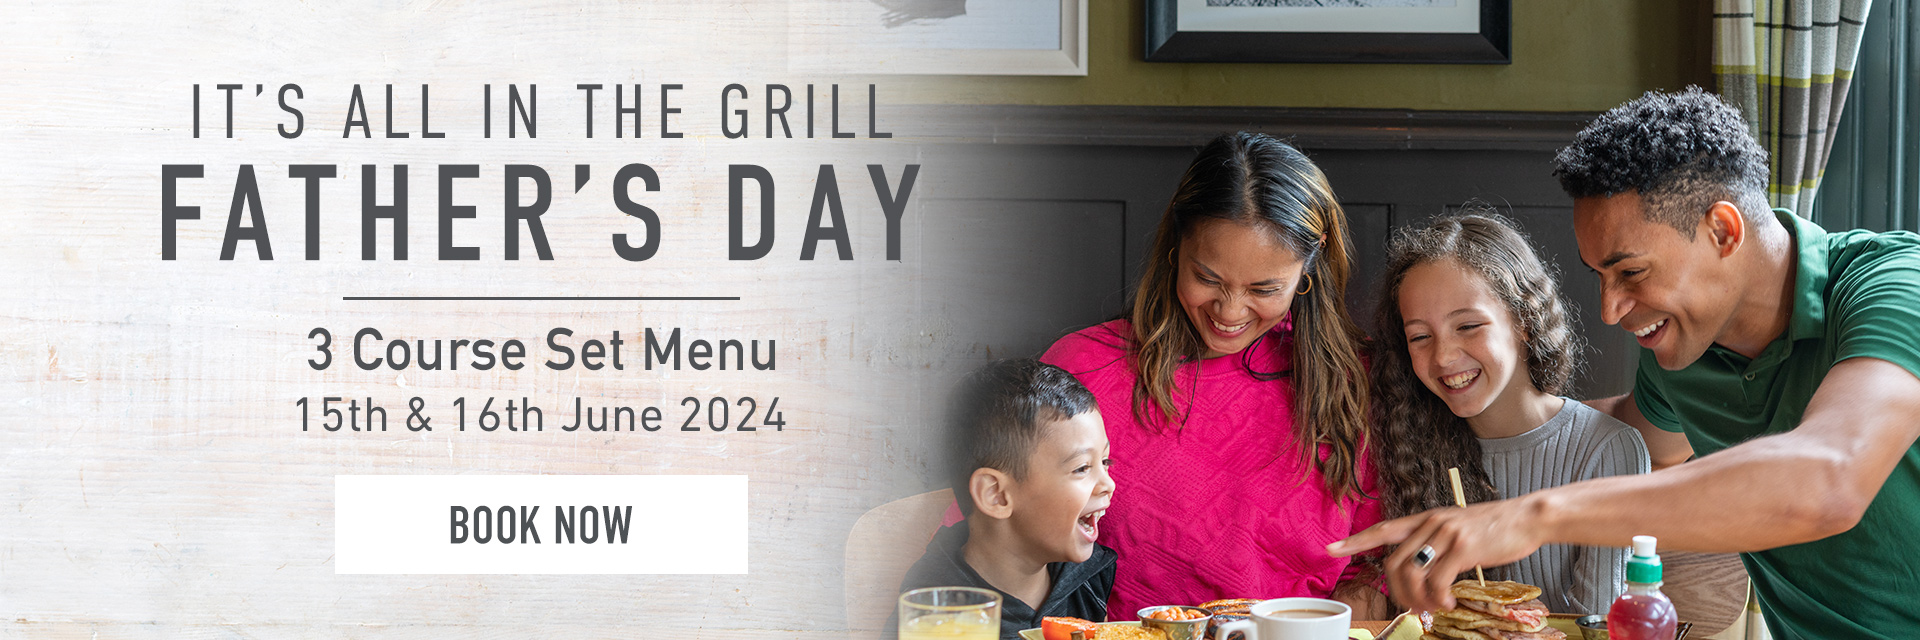 Father’s Day at Harvester Chesterfield